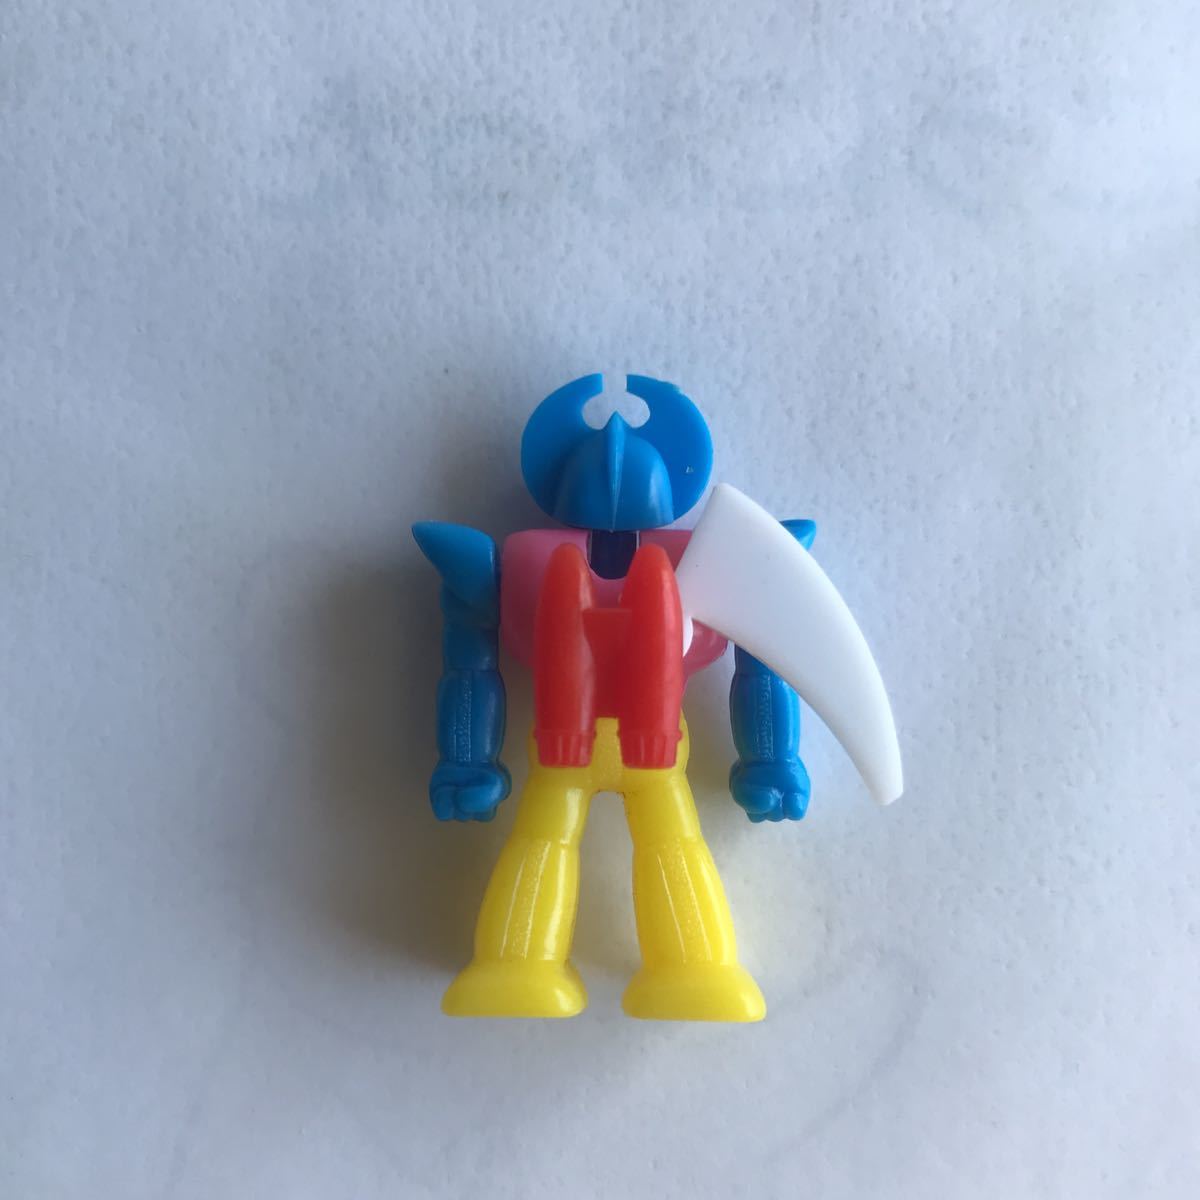 # Showa Retro Glyco robot feather mile display less figure Robot toy that time thing a# inspection extra Shokugan eraser former times Glyco old toy Chogokin 